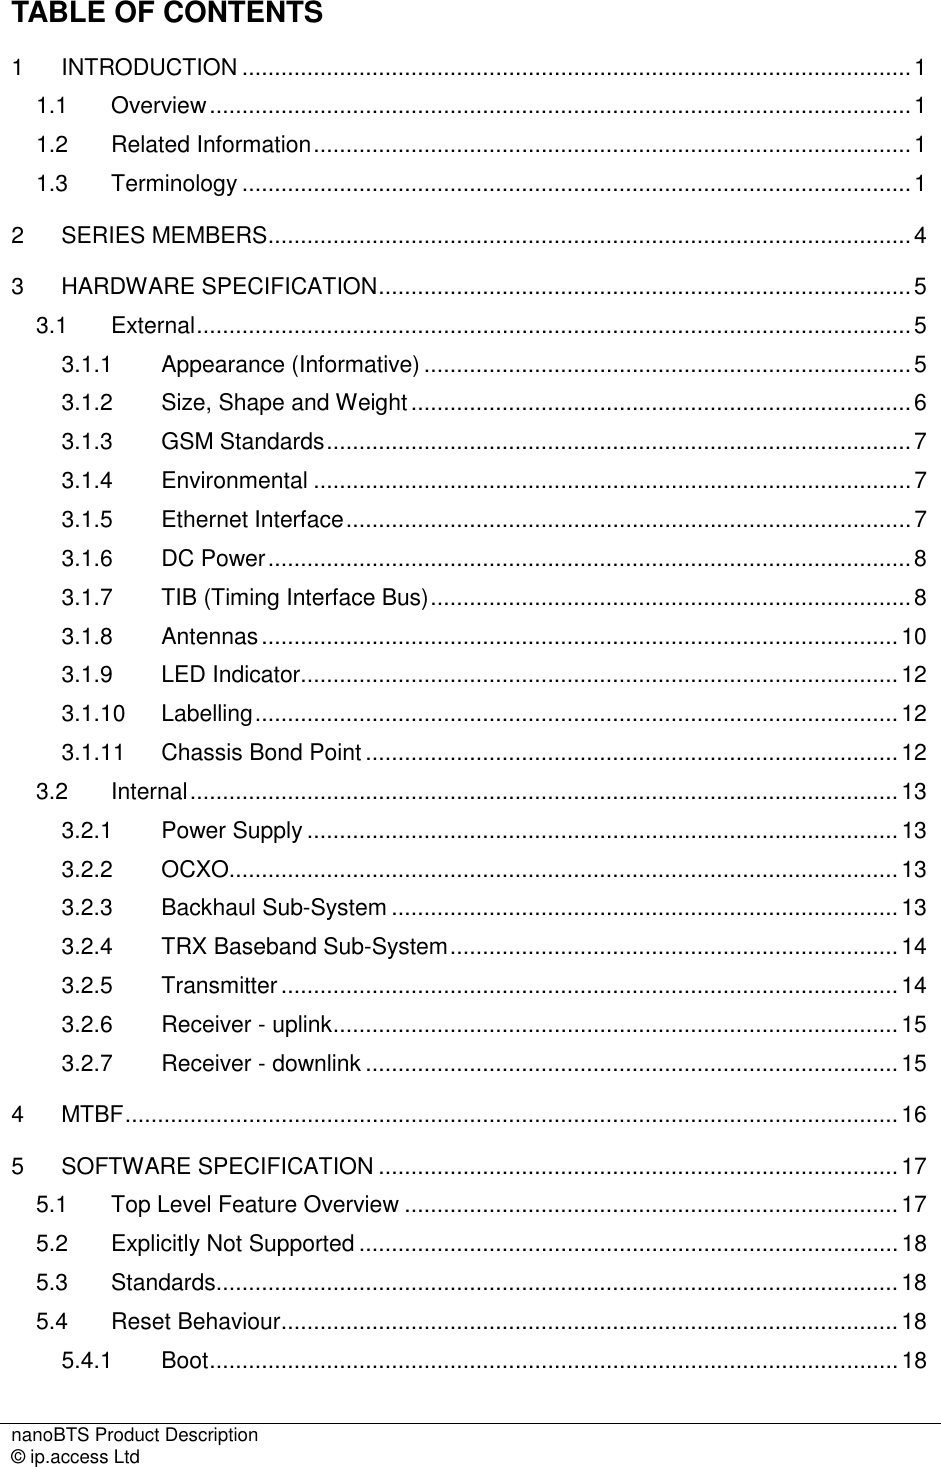 nanoBTS Product Description   © ip.access Ltd    TABLE OF CONTENTS 1 INTRODUCTION .......................................................................................................1 1.1 Overview............................................................................................................1 1.2 Related Information............................................................................................1 1.3 Terminology .......................................................................................................1 2 SERIES MEMBERS...................................................................................................4 3 HARDWARE SPECIFICATION..................................................................................5 3.1 External..............................................................................................................5 3.1.1 Appearance (Informative) ...........................................................................5 3.1.2 Size, Shape and Weight.............................................................................6 3.1.3 GSM Standards..........................................................................................7 3.1.4 Environmental ............................................................................................7 3.1.5 Ethernet Interface.......................................................................................7 3.1.6 DC Power...................................................................................................8 3.1.7 TIB (Timing Interface Bus)..........................................................................8 3.1.8 Antennas..................................................................................................10 3.1.9 LED Indicator............................................................................................12 3.1.10 Labelling...................................................................................................12 3.1.11 Chassis Bond Point ..................................................................................12 3.2 Internal.............................................................................................................13 3.2.1 Power Supply...........................................................................................13 3.2.2 OCXO.......................................................................................................13 3.2.3 Backhaul Sub-System ..............................................................................13 3.2.4 TRX Baseband Sub-System.....................................................................14 3.2.5 Transmitter...............................................................................................14 3.2.6 Receiver - uplink.......................................................................................15 3.2.7 Receiver - downlink ..................................................................................15 4 MTBF.......................................................................................................................16 5 SOFTWARE SPECIFICATION ................................................................................17 5.1 Top Level Feature Overview ............................................................................17 5.2 Explicitly Not Supported ...................................................................................18 5.3 Standards.........................................................................................................18 5.4 Reset Behaviour...............................................................................................18 5.4.1 Boot..........................................................................................................18 